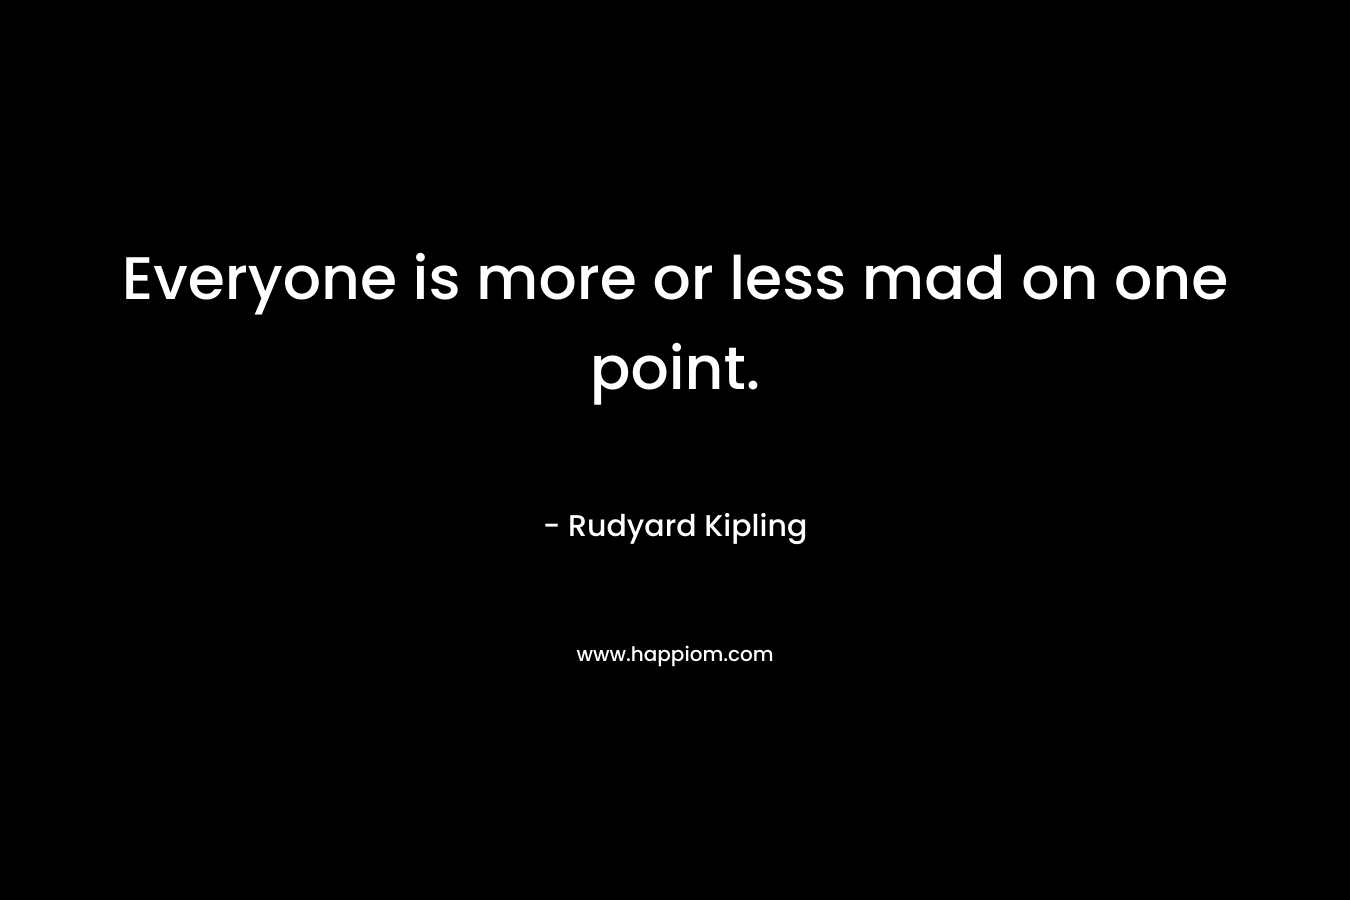 Everyone is more or less mad on one point. – Rudyard Kipling